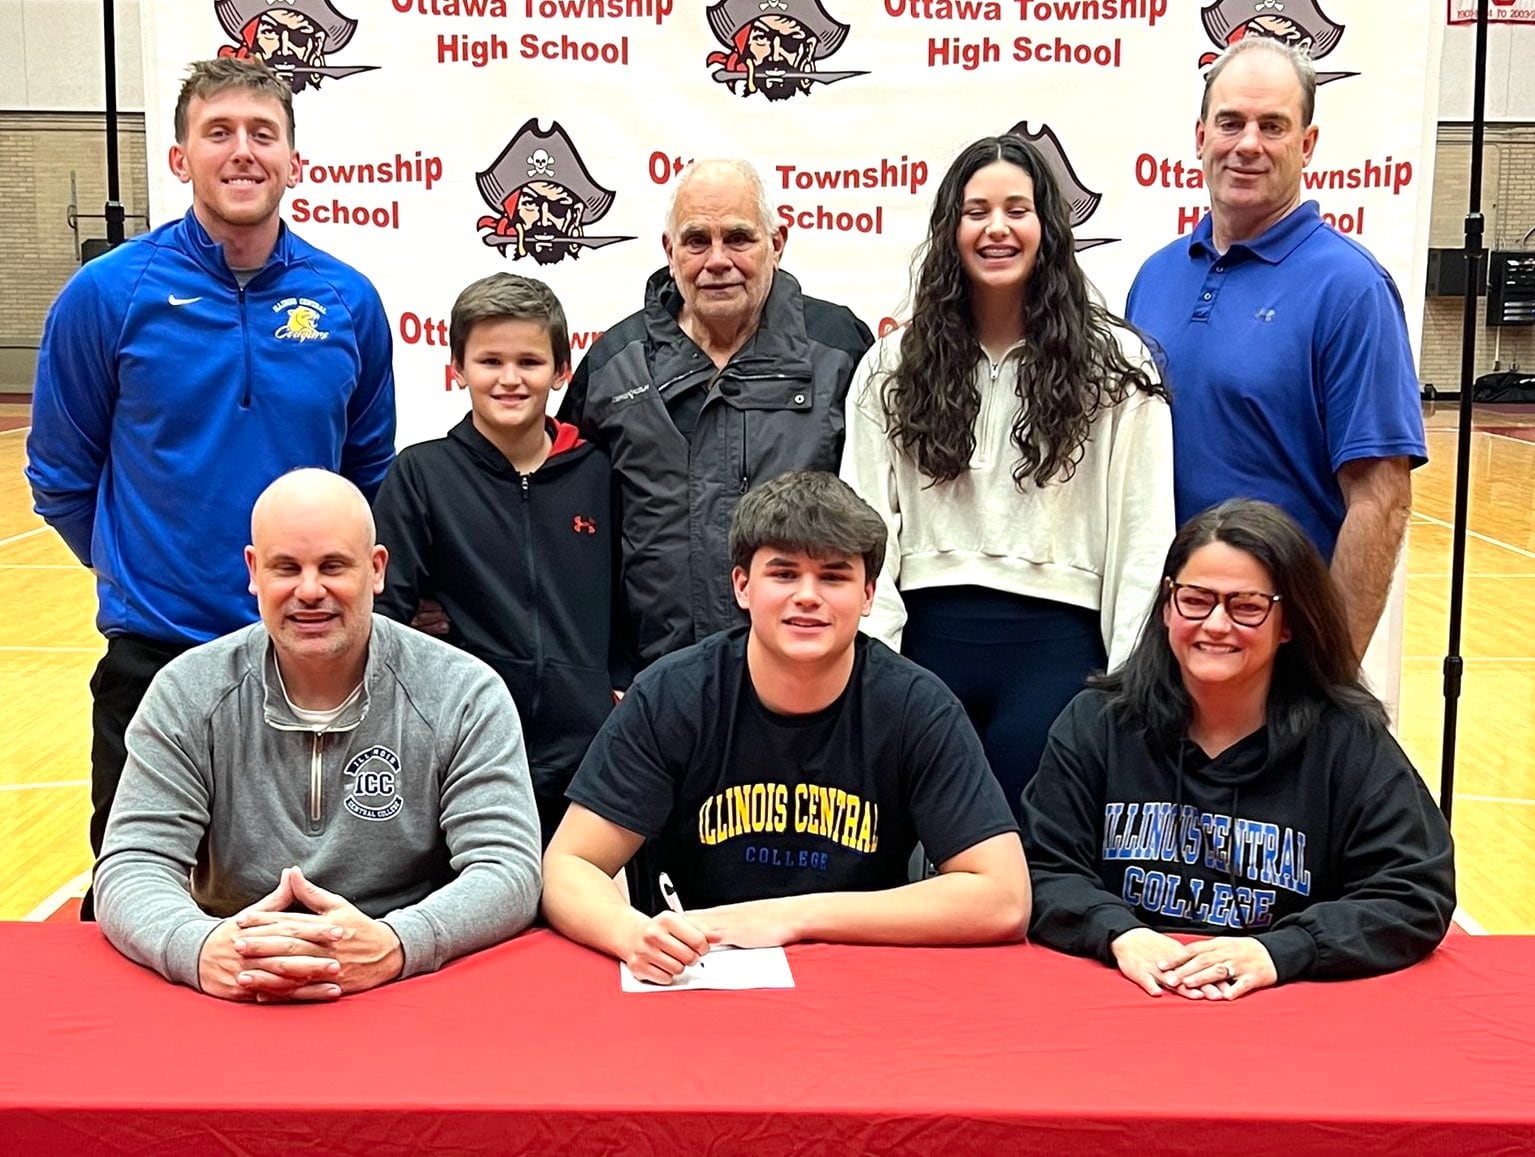 College signing: Ottawa’s Cooper Knoll selects Illinois Central College basketball